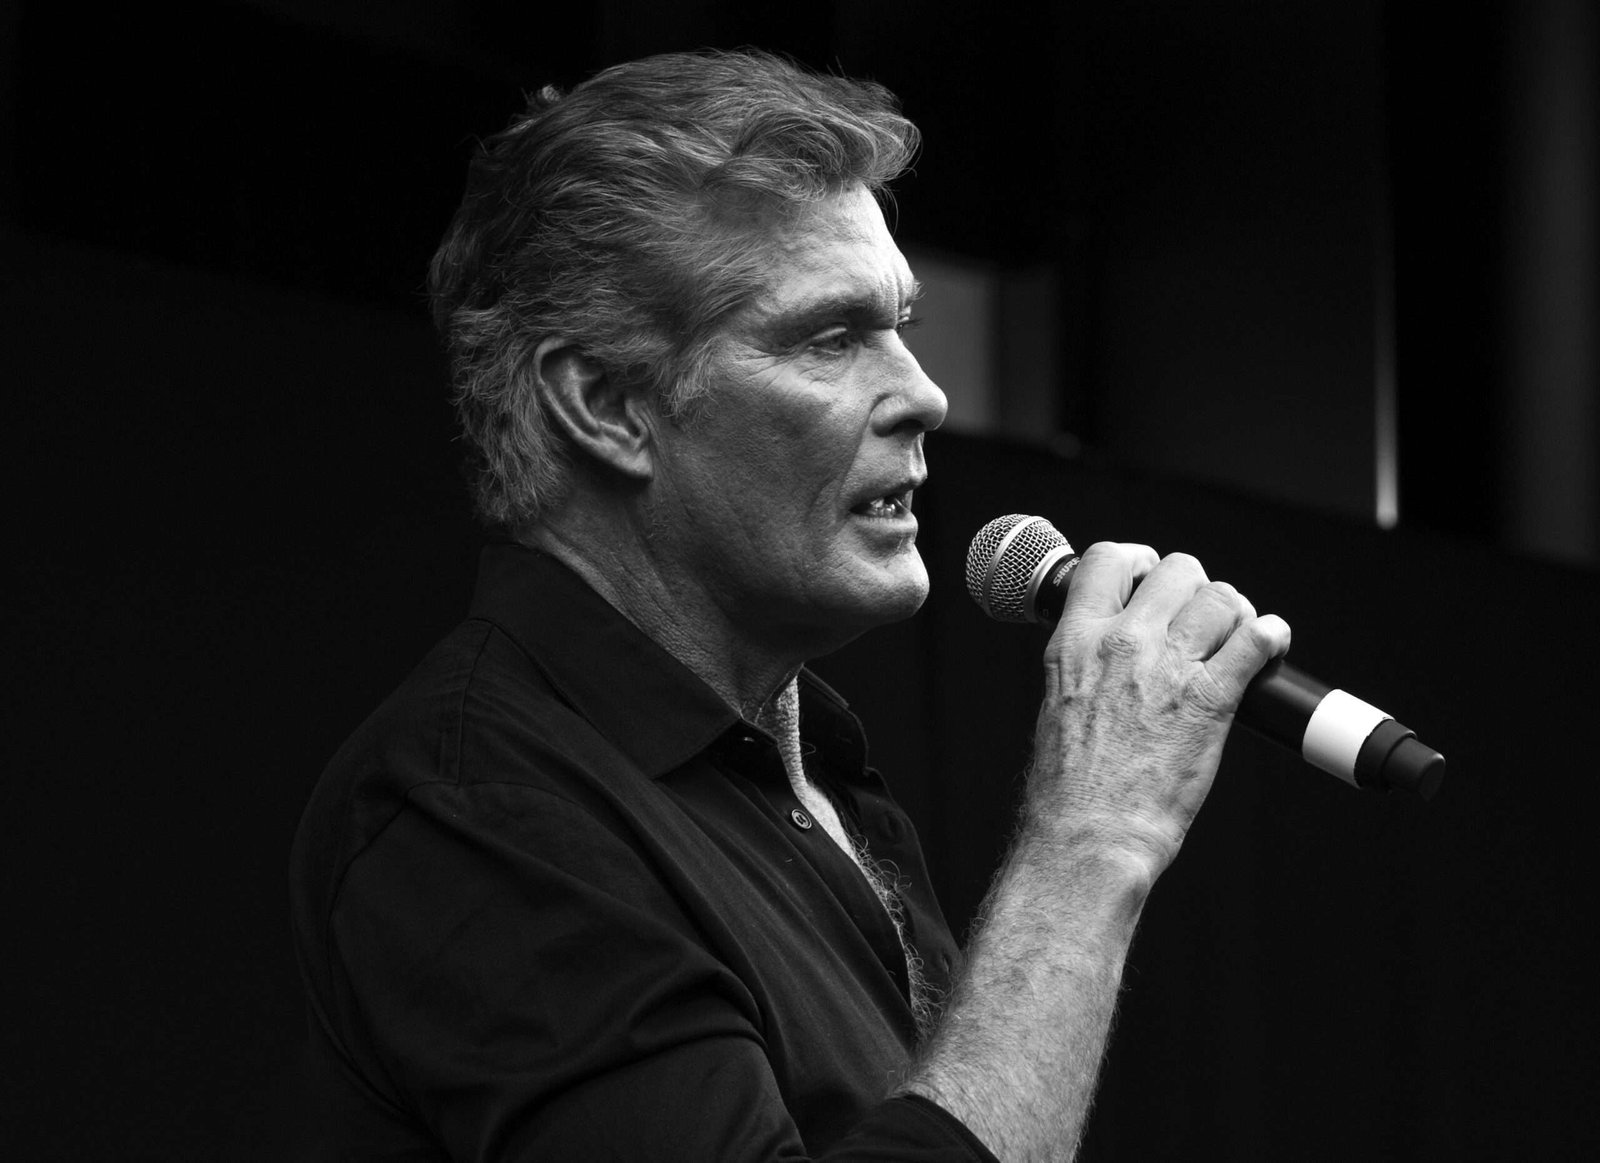 David Hasselhoff, nicknamed "The Hoff" is an American actor, singer, and television personality. He's best known for his part as Michael Knight on Knight Ride and as L.A. County Lifeguard Mitch Buchannon in Baywatch. Ghost photographed him at the Facts Convention Ghent in 2016.